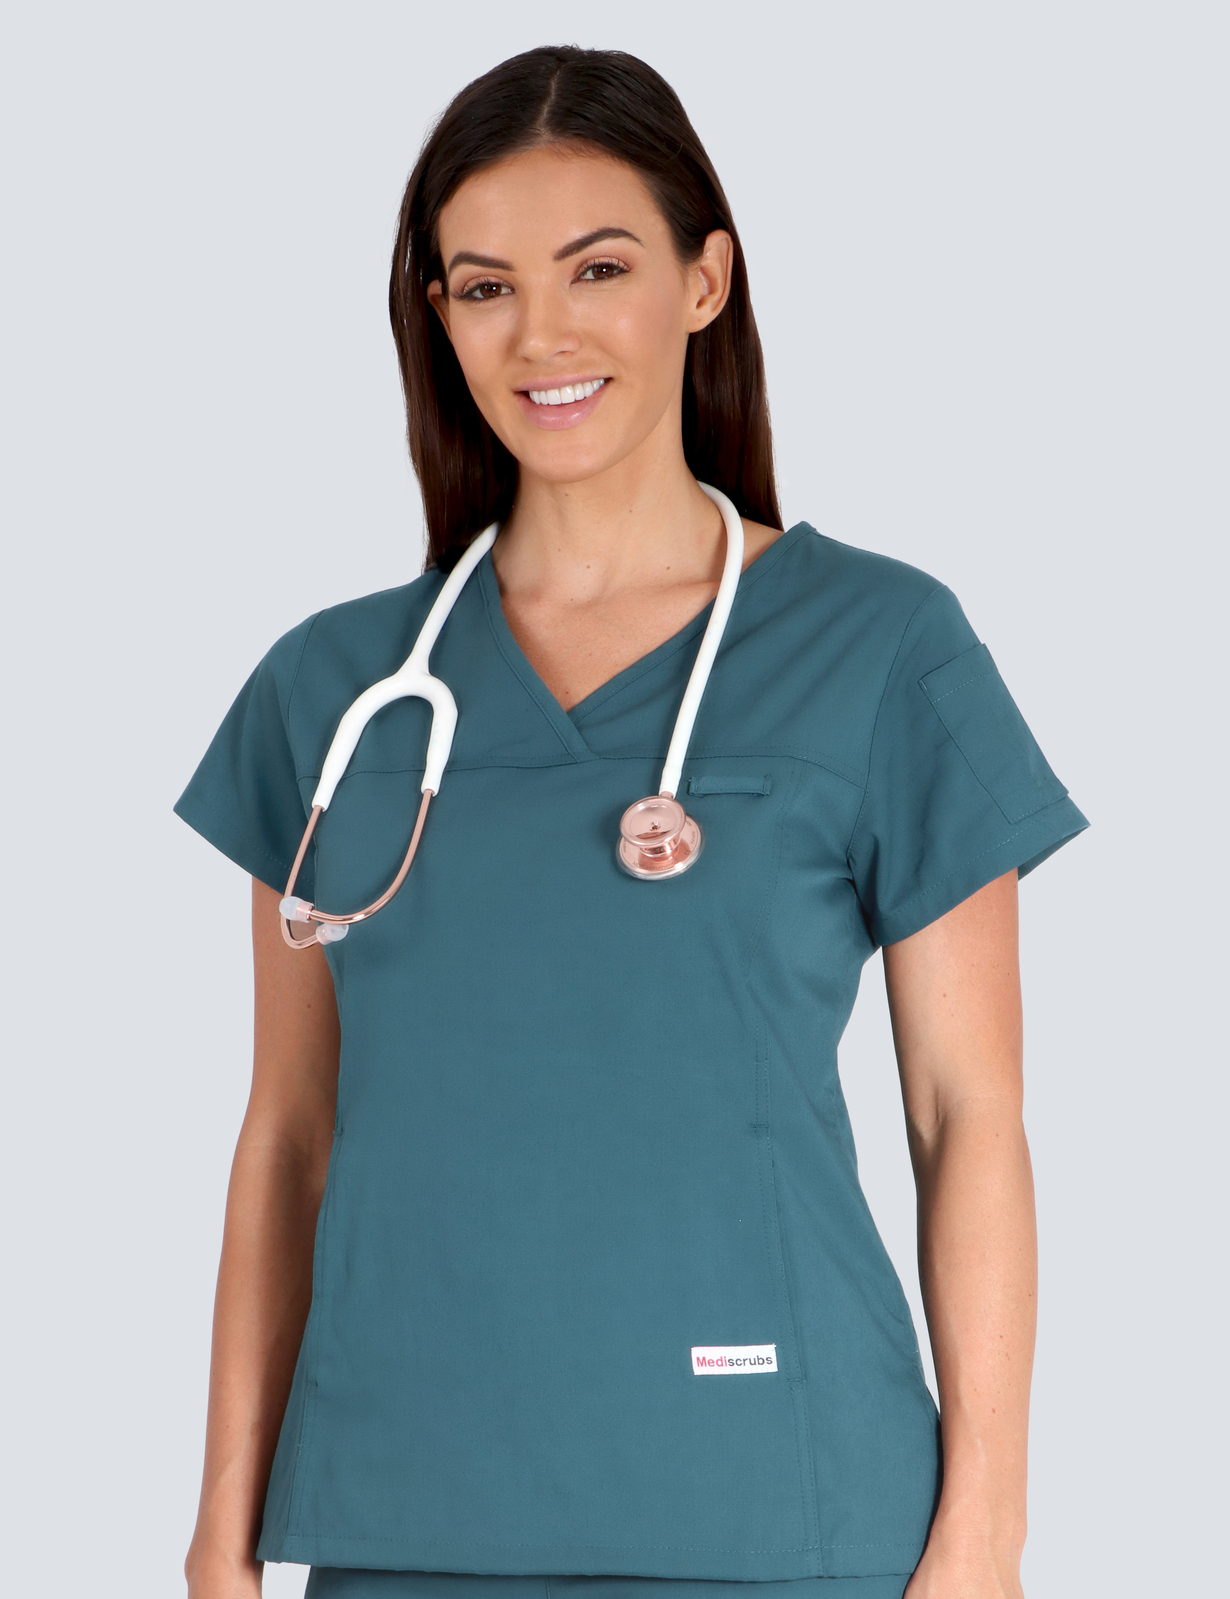 QEII Jubilee Hospital Physiotherapy Department -  Emergency Practitioner Uniform Top Only Bundle (Women's Fit Solid Top incl Logos)